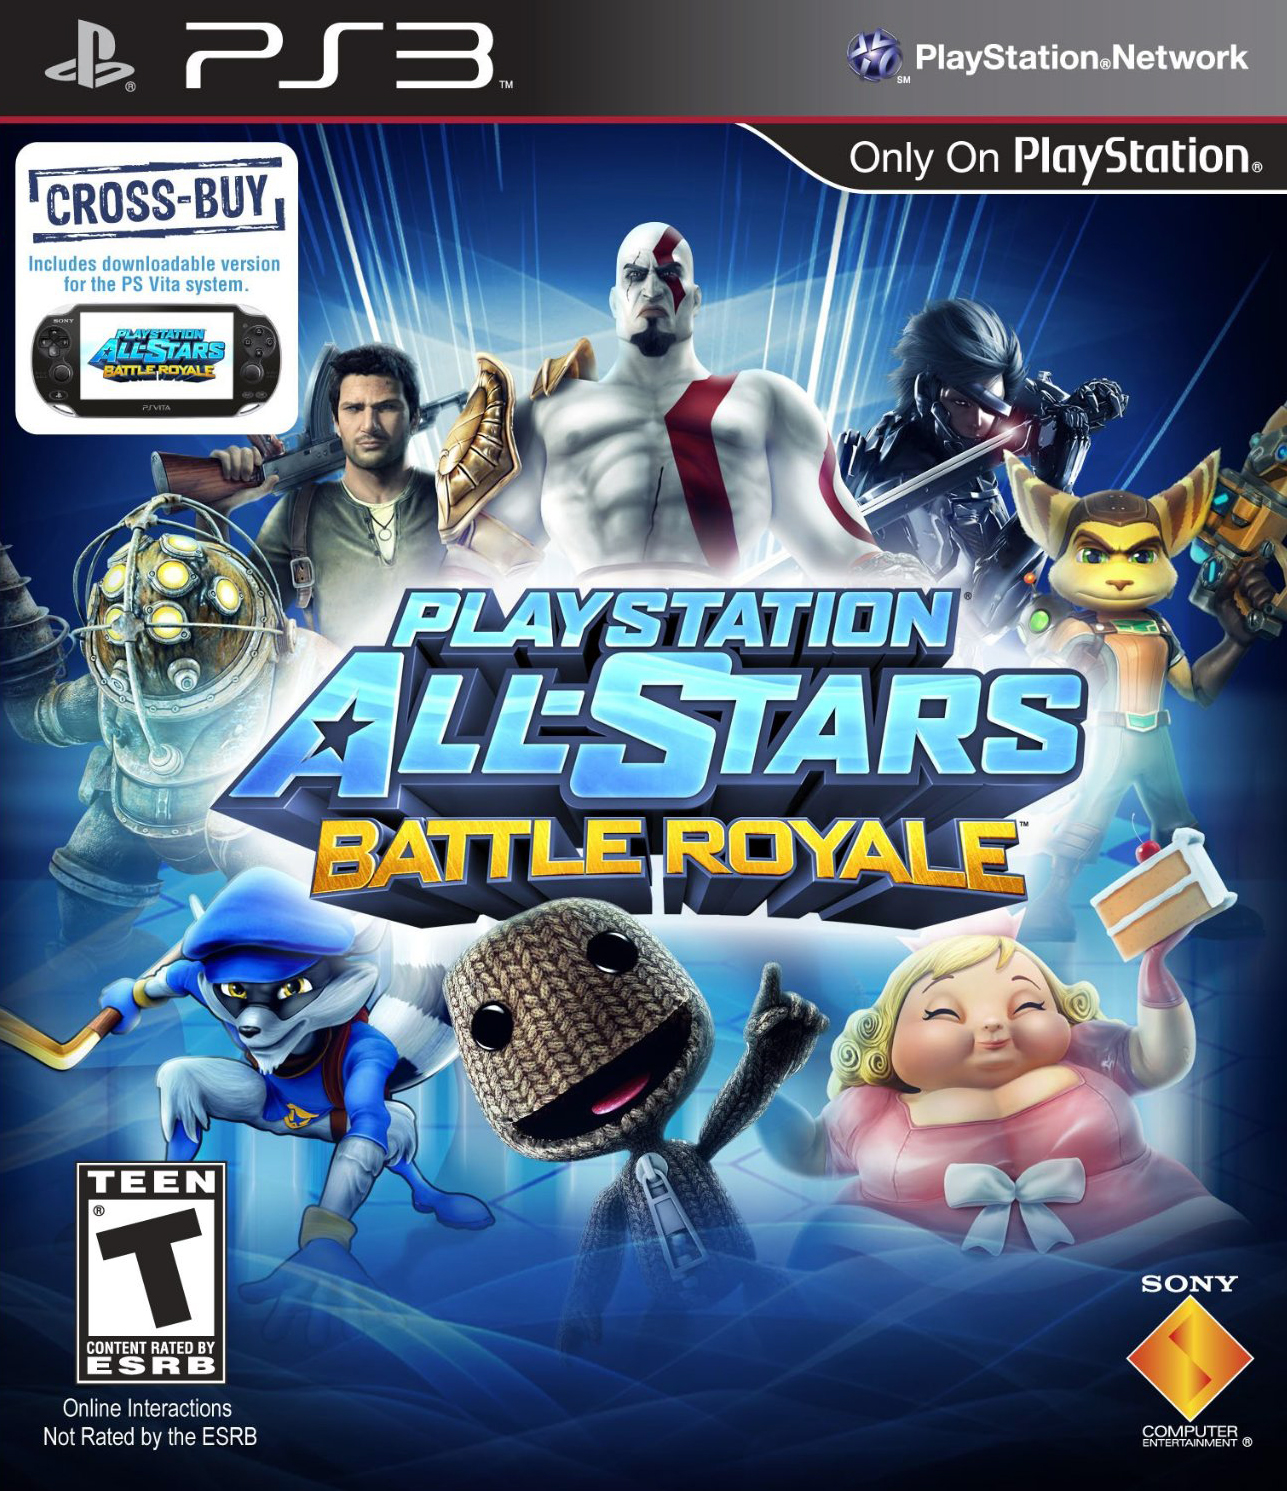 Playstation All-stars Battle royale (PS3)